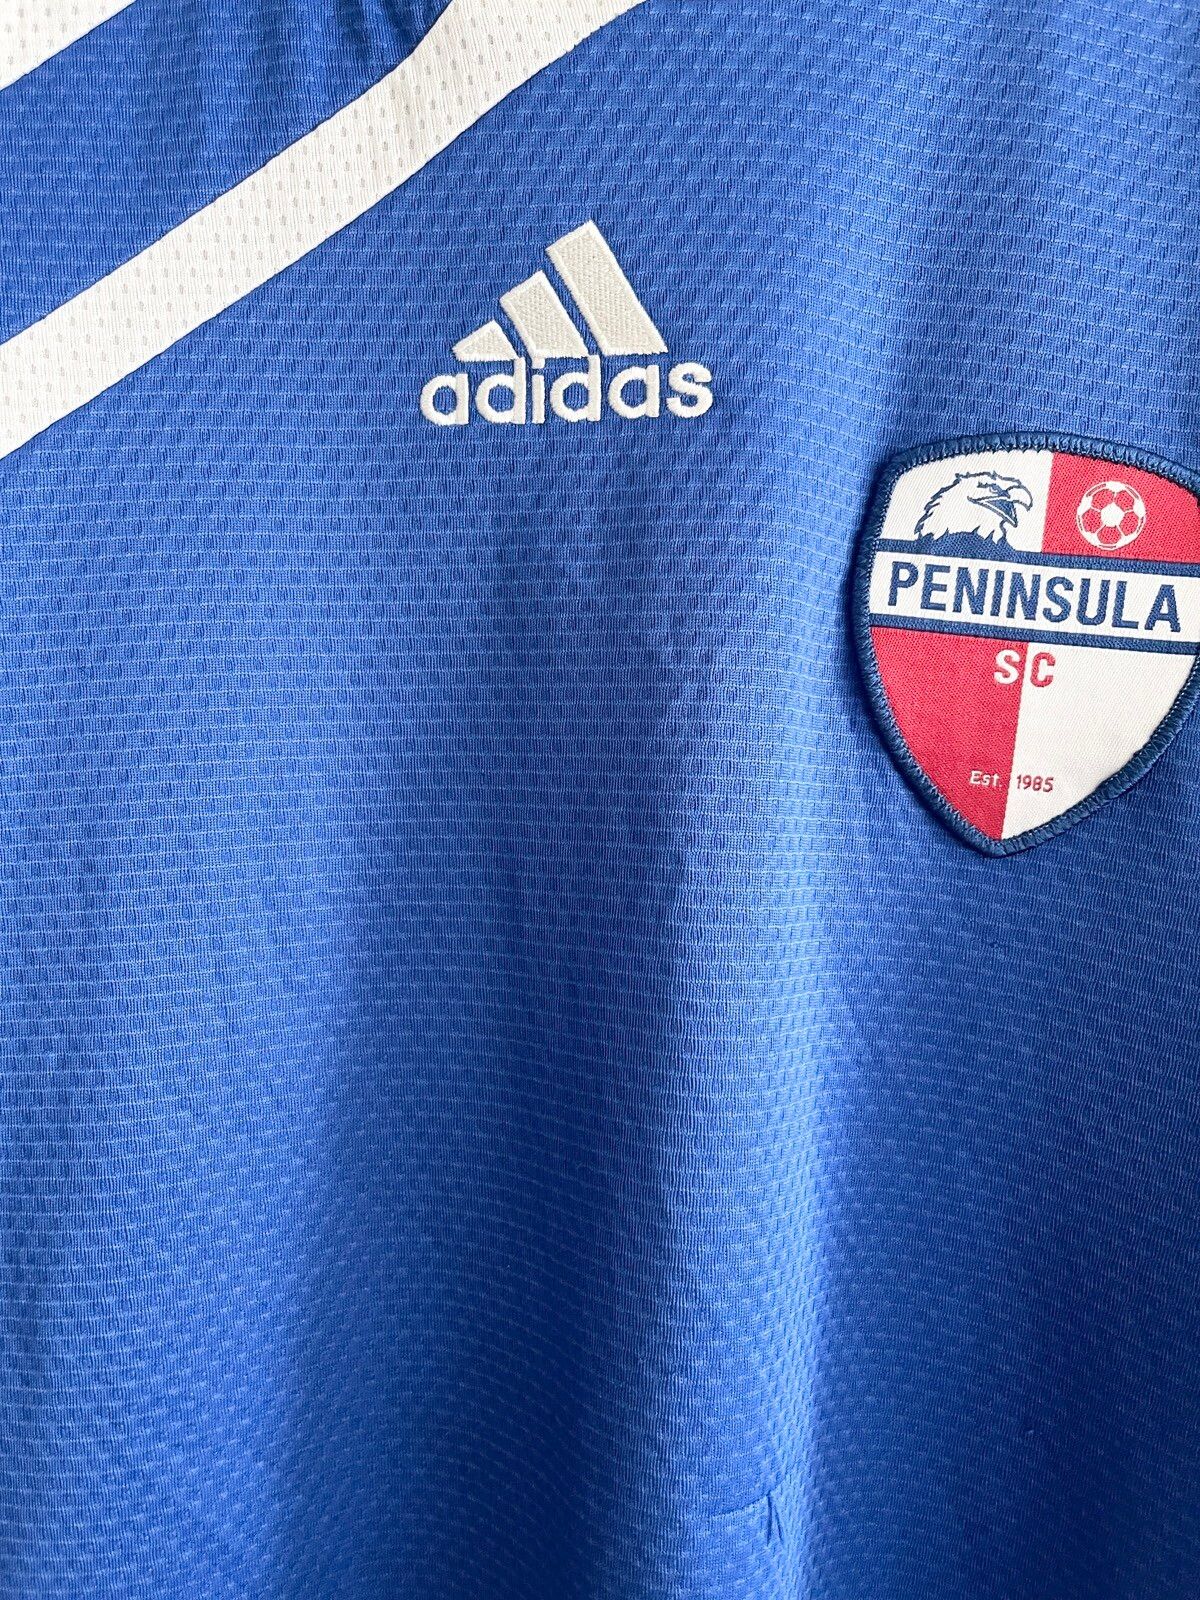 Vintage 2010 Peninsula Soccer Club Home Jersey - 3